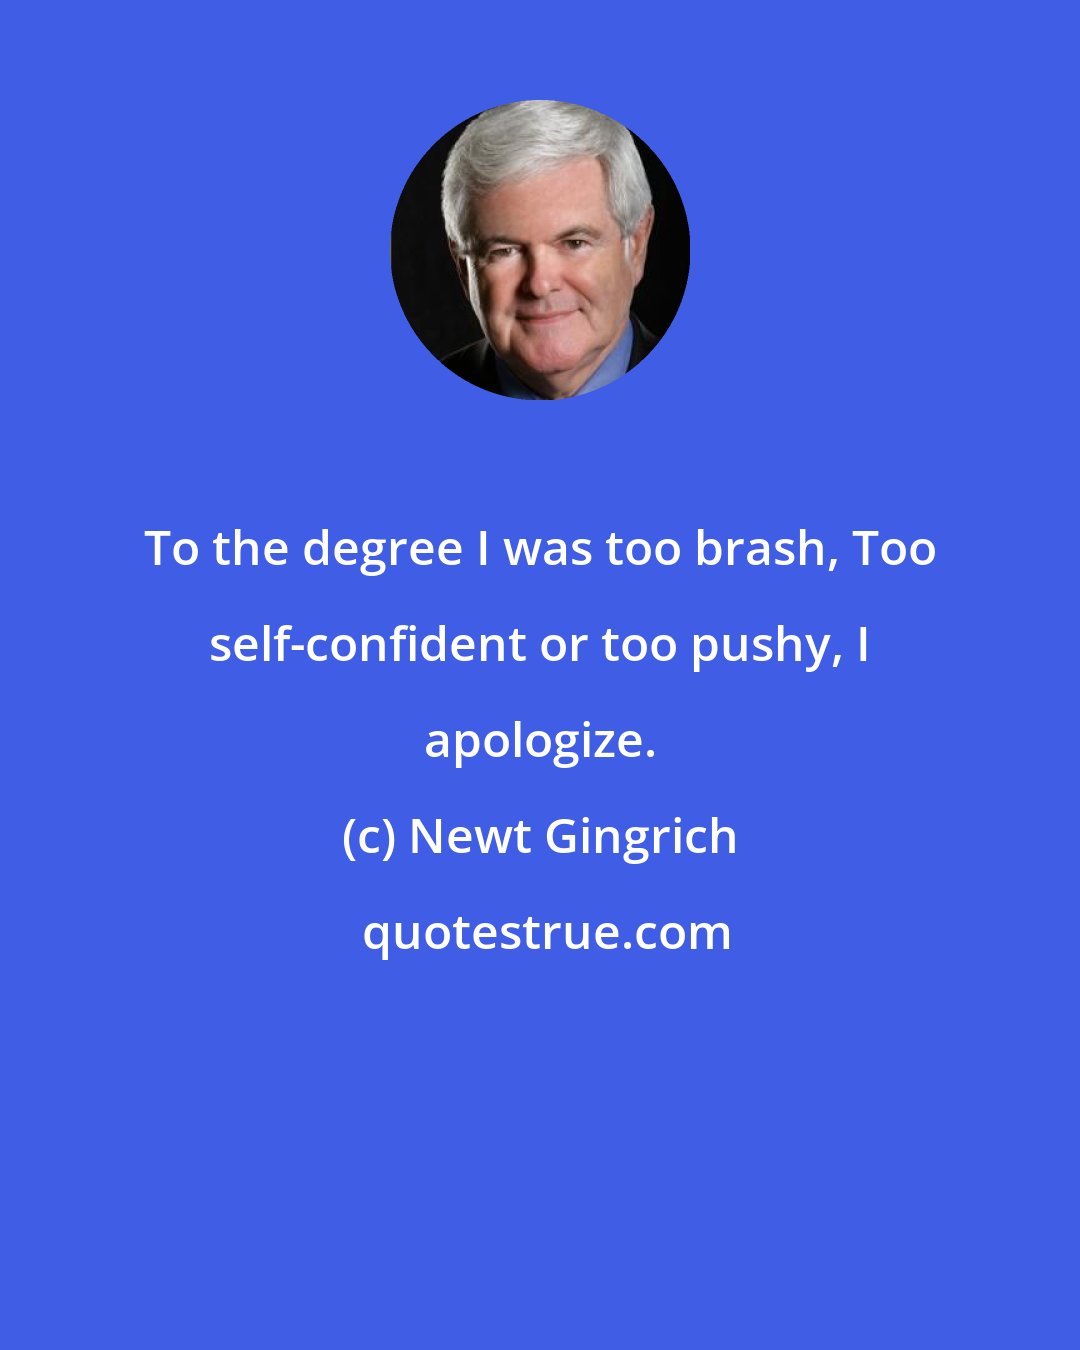 Newt Gingrich: To the degree I was too brash, Too self-confident or too pushy, I apologize.